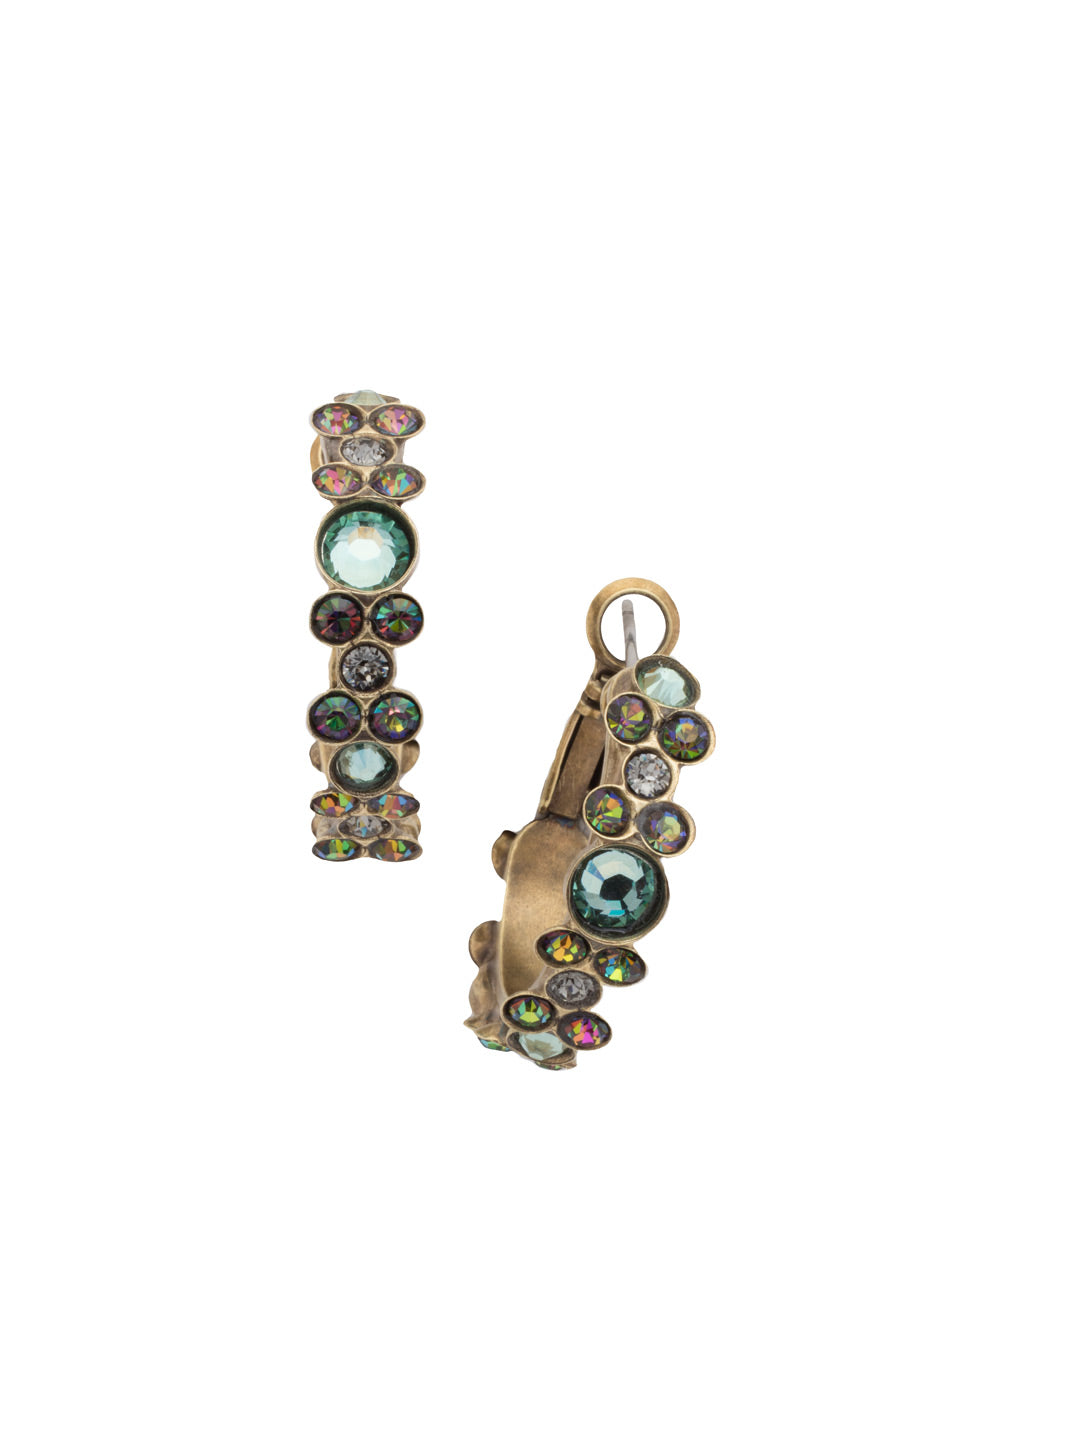 Floral Hoop Earrings - EBP15AGCRP - <p>Intricate design, infused with gorgeous shine. A motif of floral clusters is featured here on a small, delicate hoop with a hinged post backing. From Sorrelli's Crystal Patina collection in our Antique Gold-tone finish.</p>